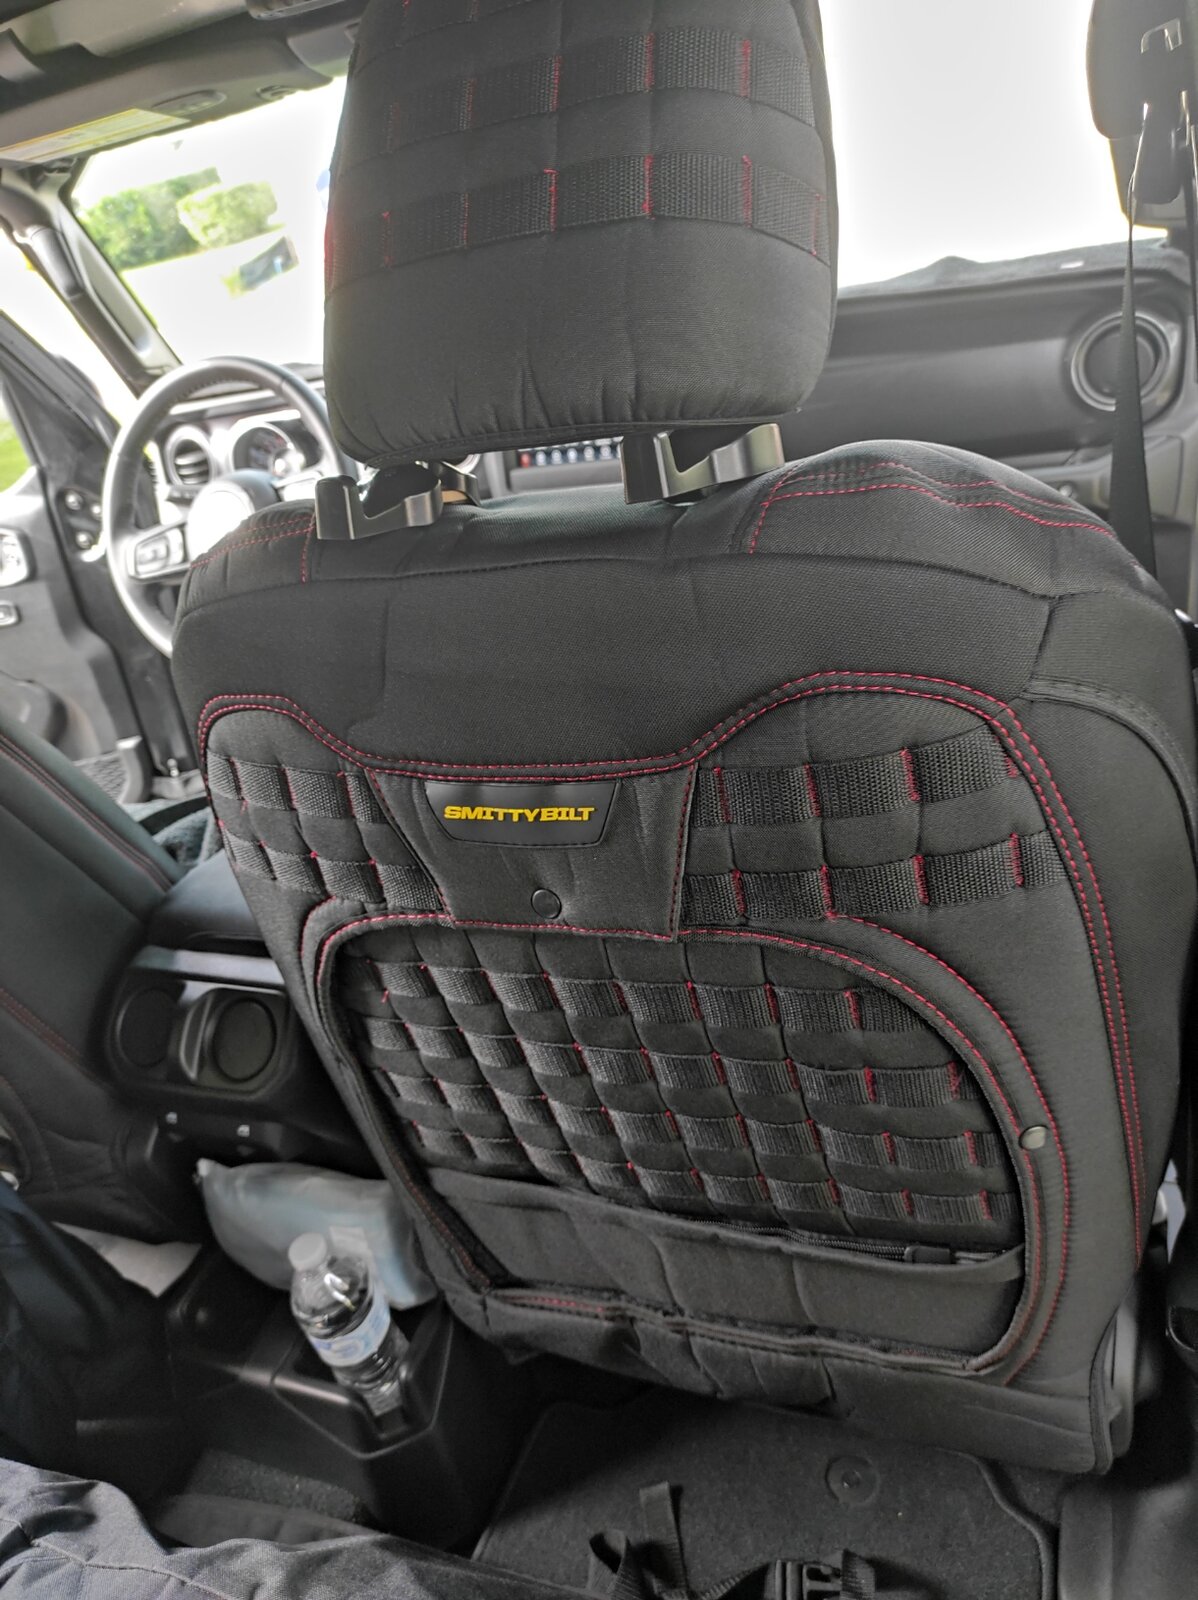 Best seat covers for the Gladiator? | Page 5 | Jeep Gladiator Forum